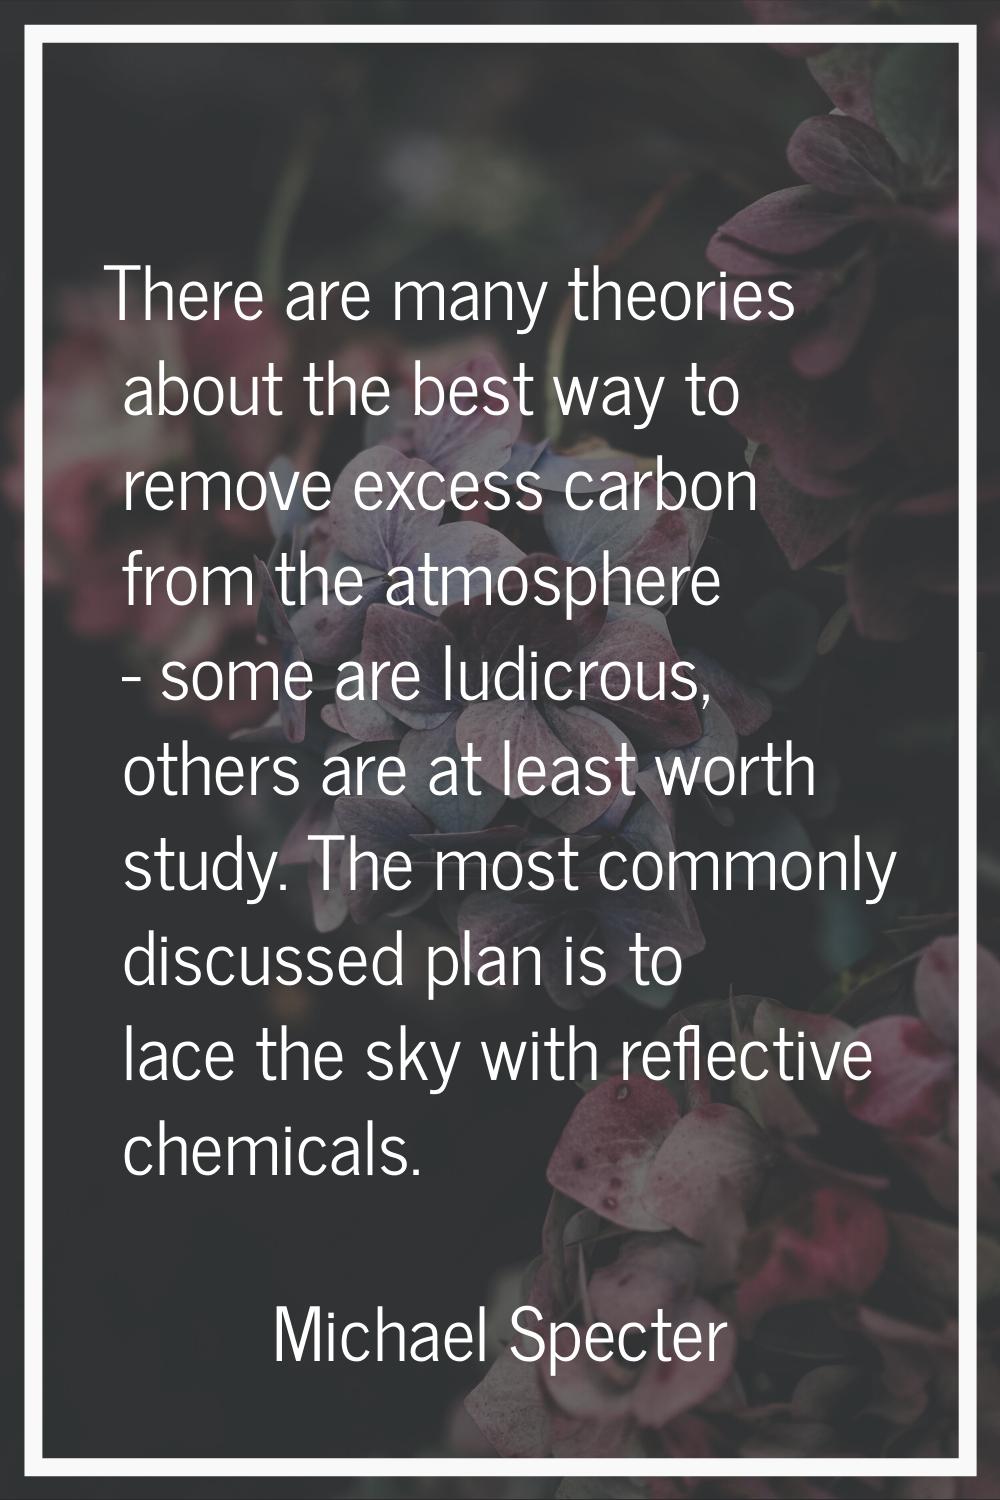 There are many theories about the best way to remove excess carbon from the atmosphere - some are l